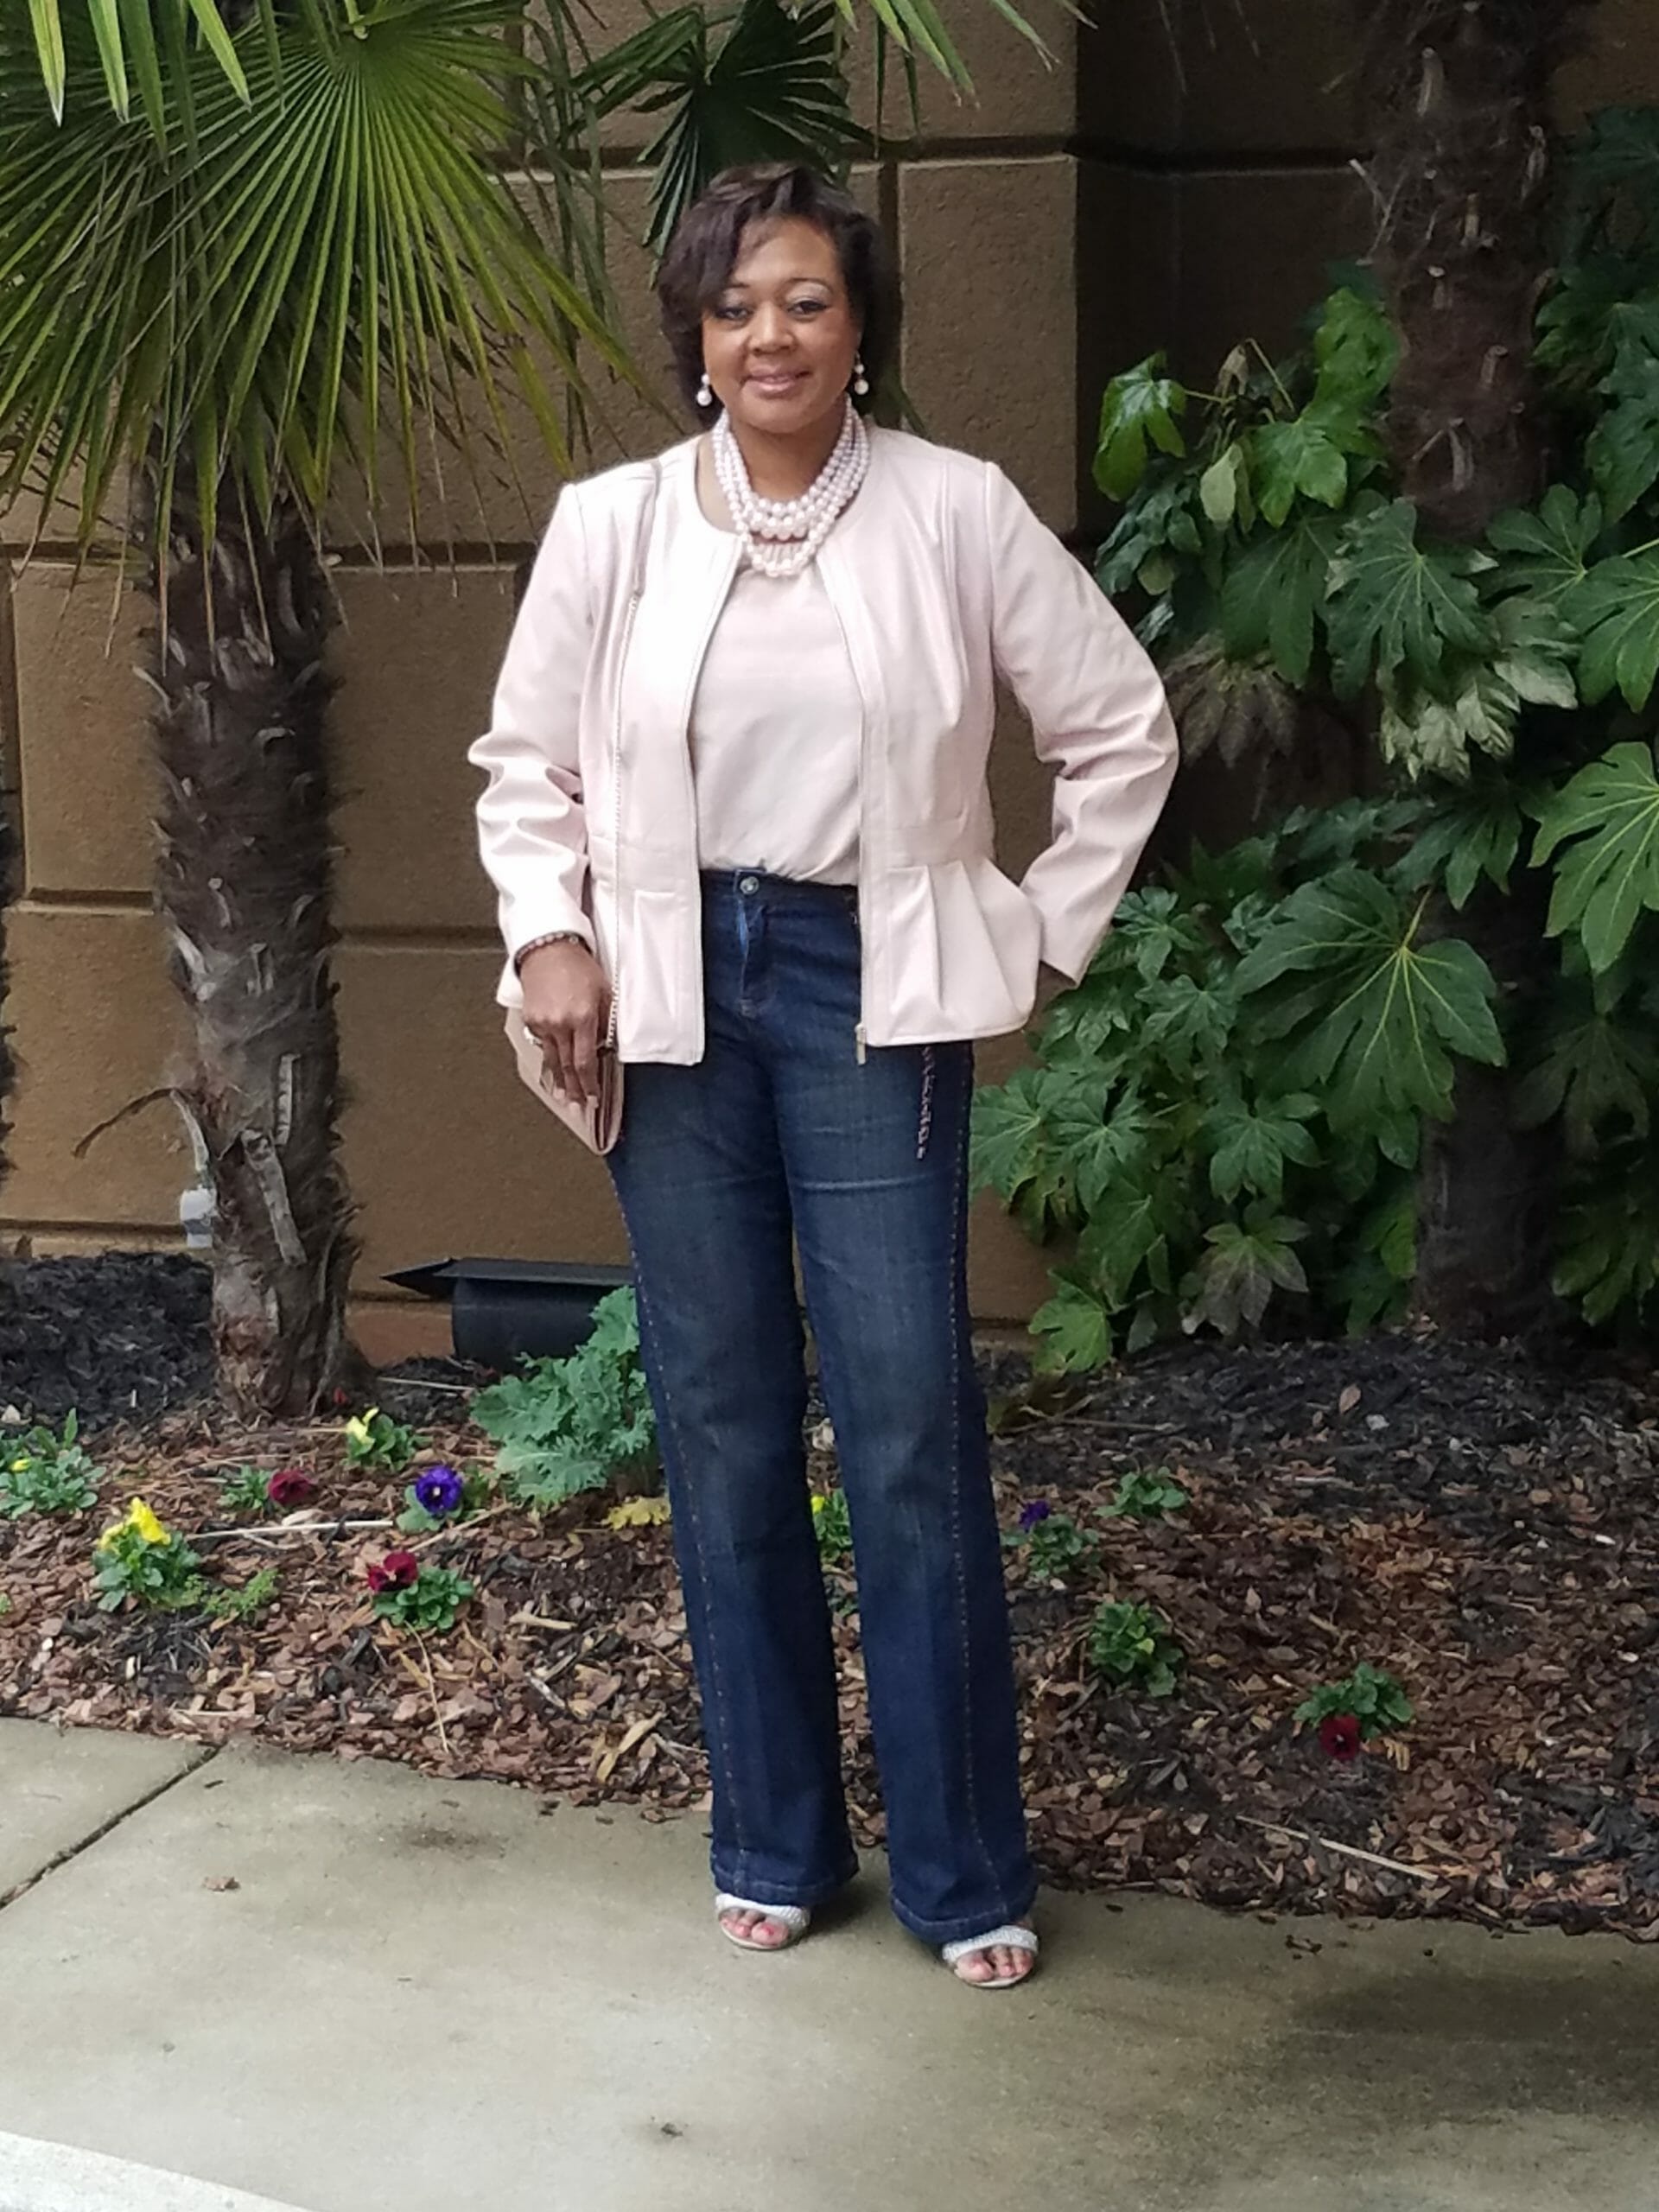 A Midnight Velvet customer by a palm tree, in a blush top and peplum jacket set, jeans, and a pearl necklace.